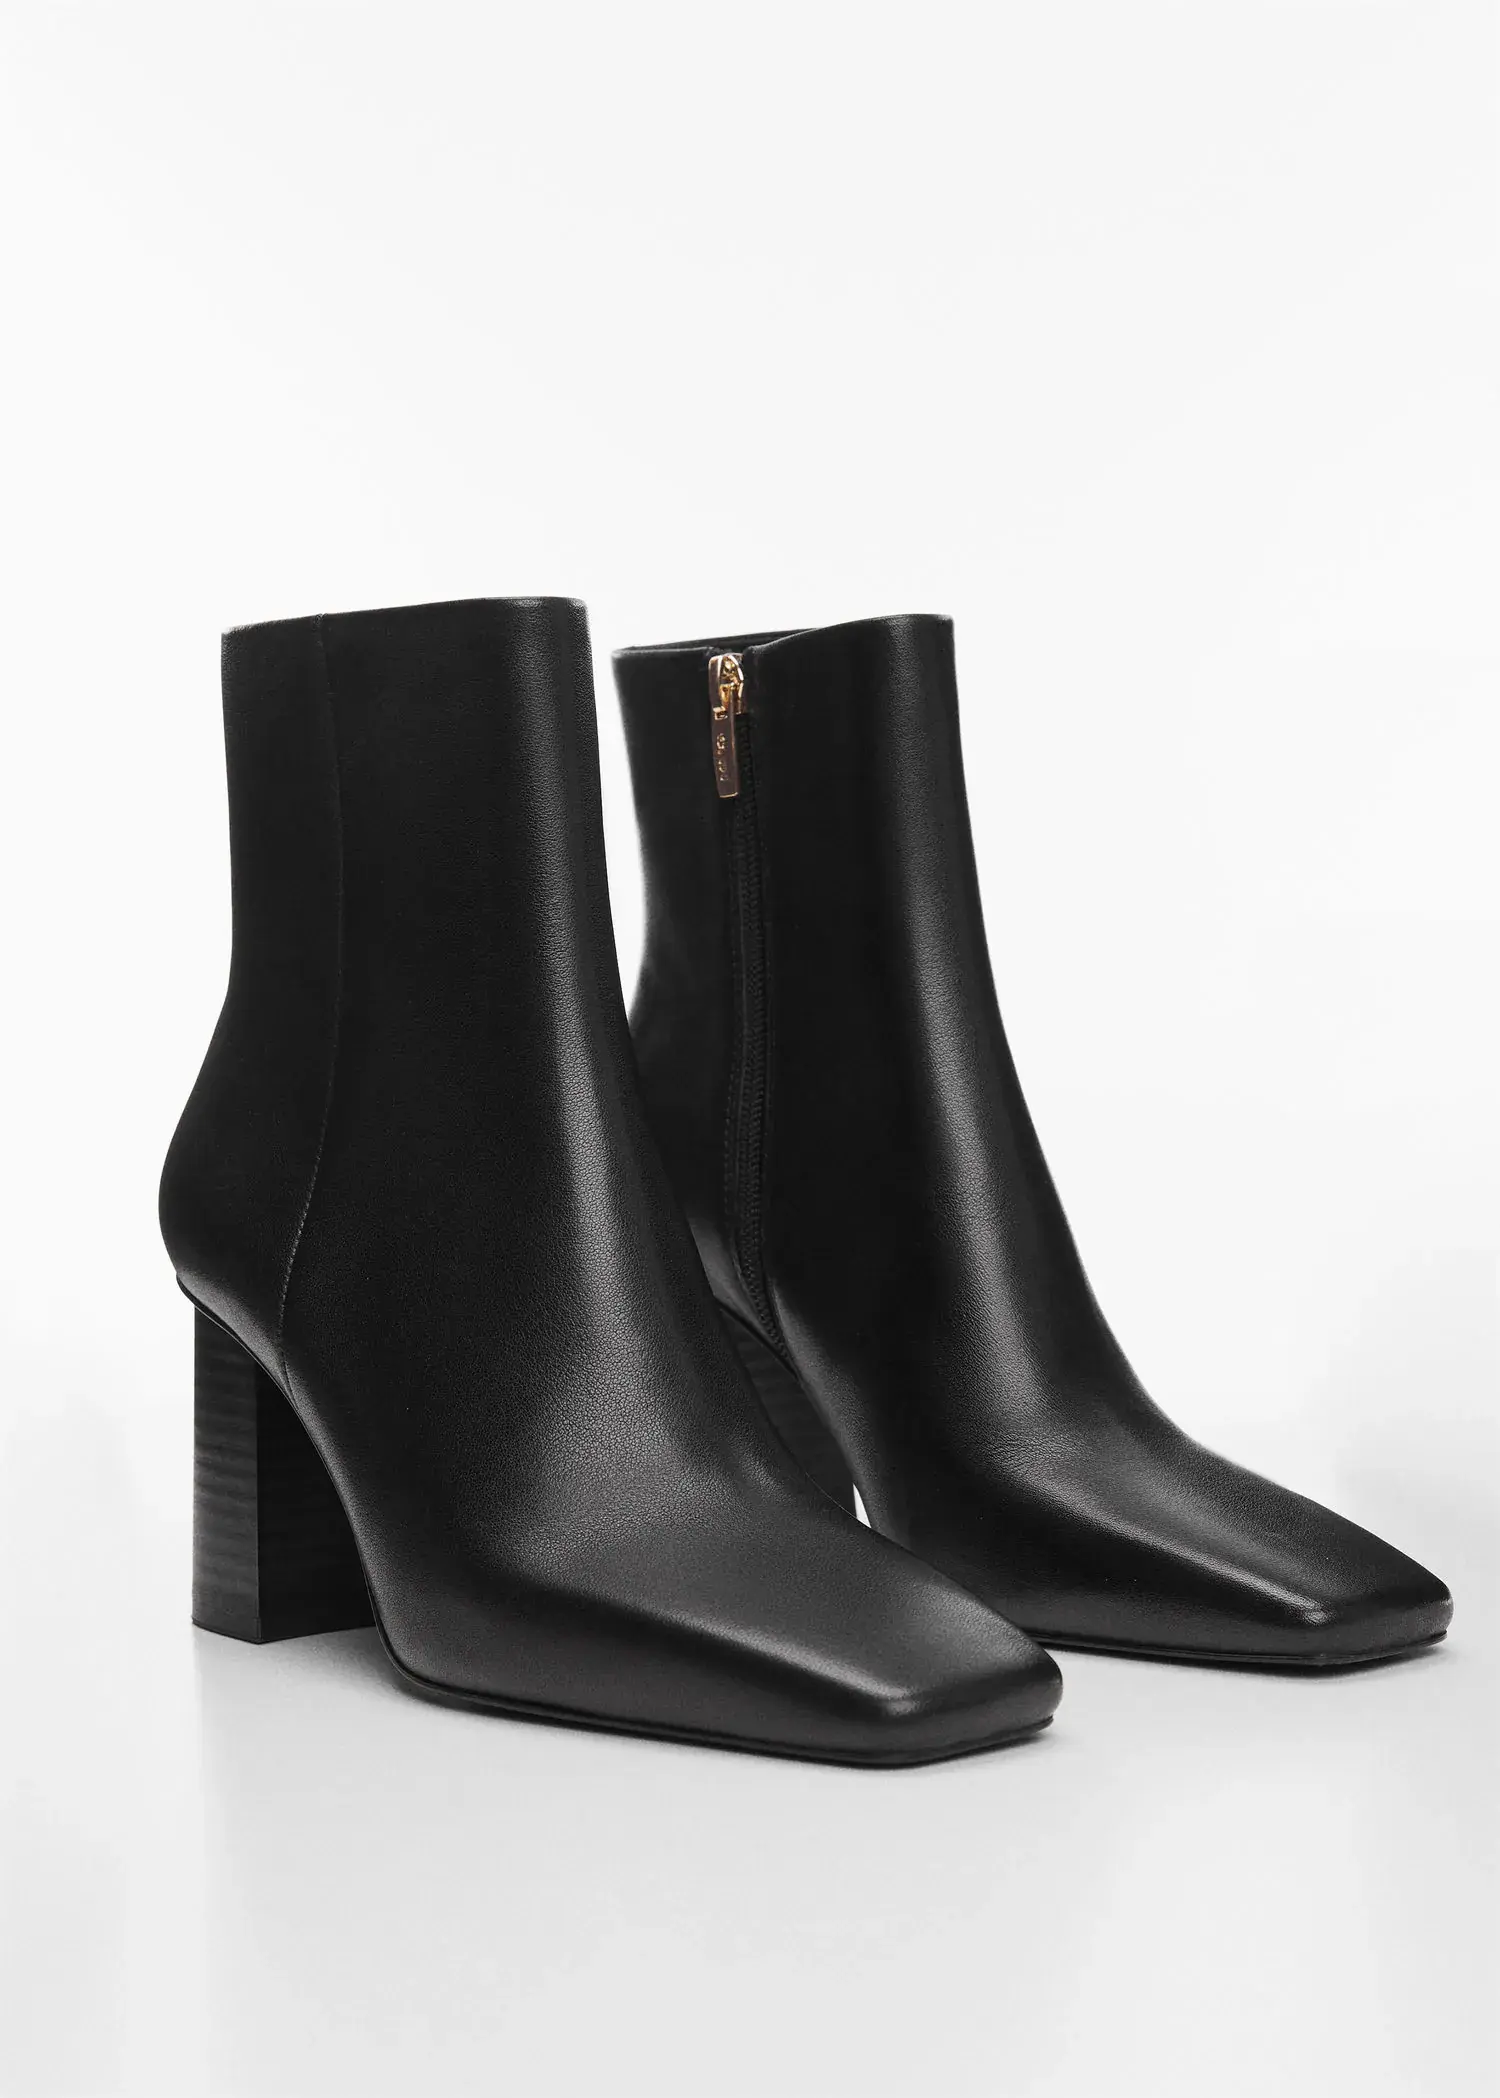 Mango Squared toe leather ankle boots. 2